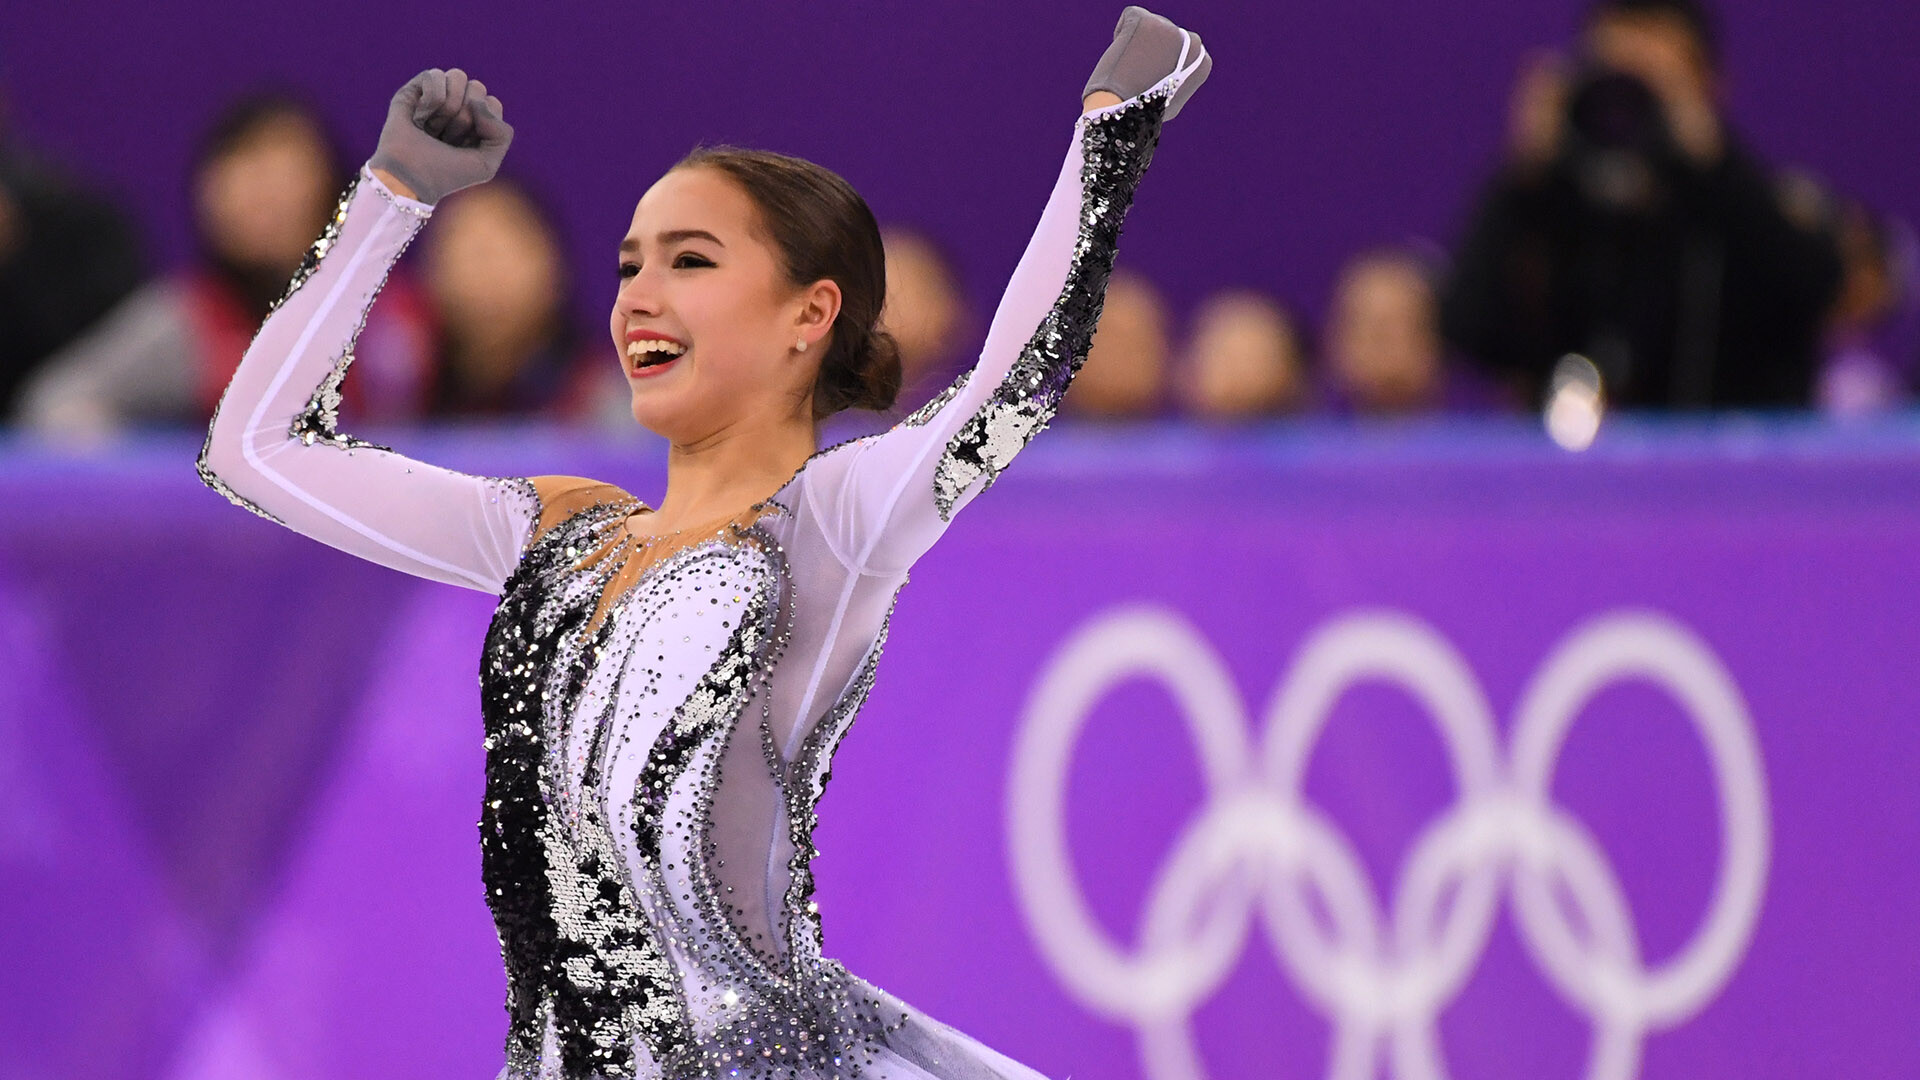 Alina Zagitova: She completed the triple lutz–triple loop combination at the 2018 Olympics. 1920x1080 Full HD Wallpaper.